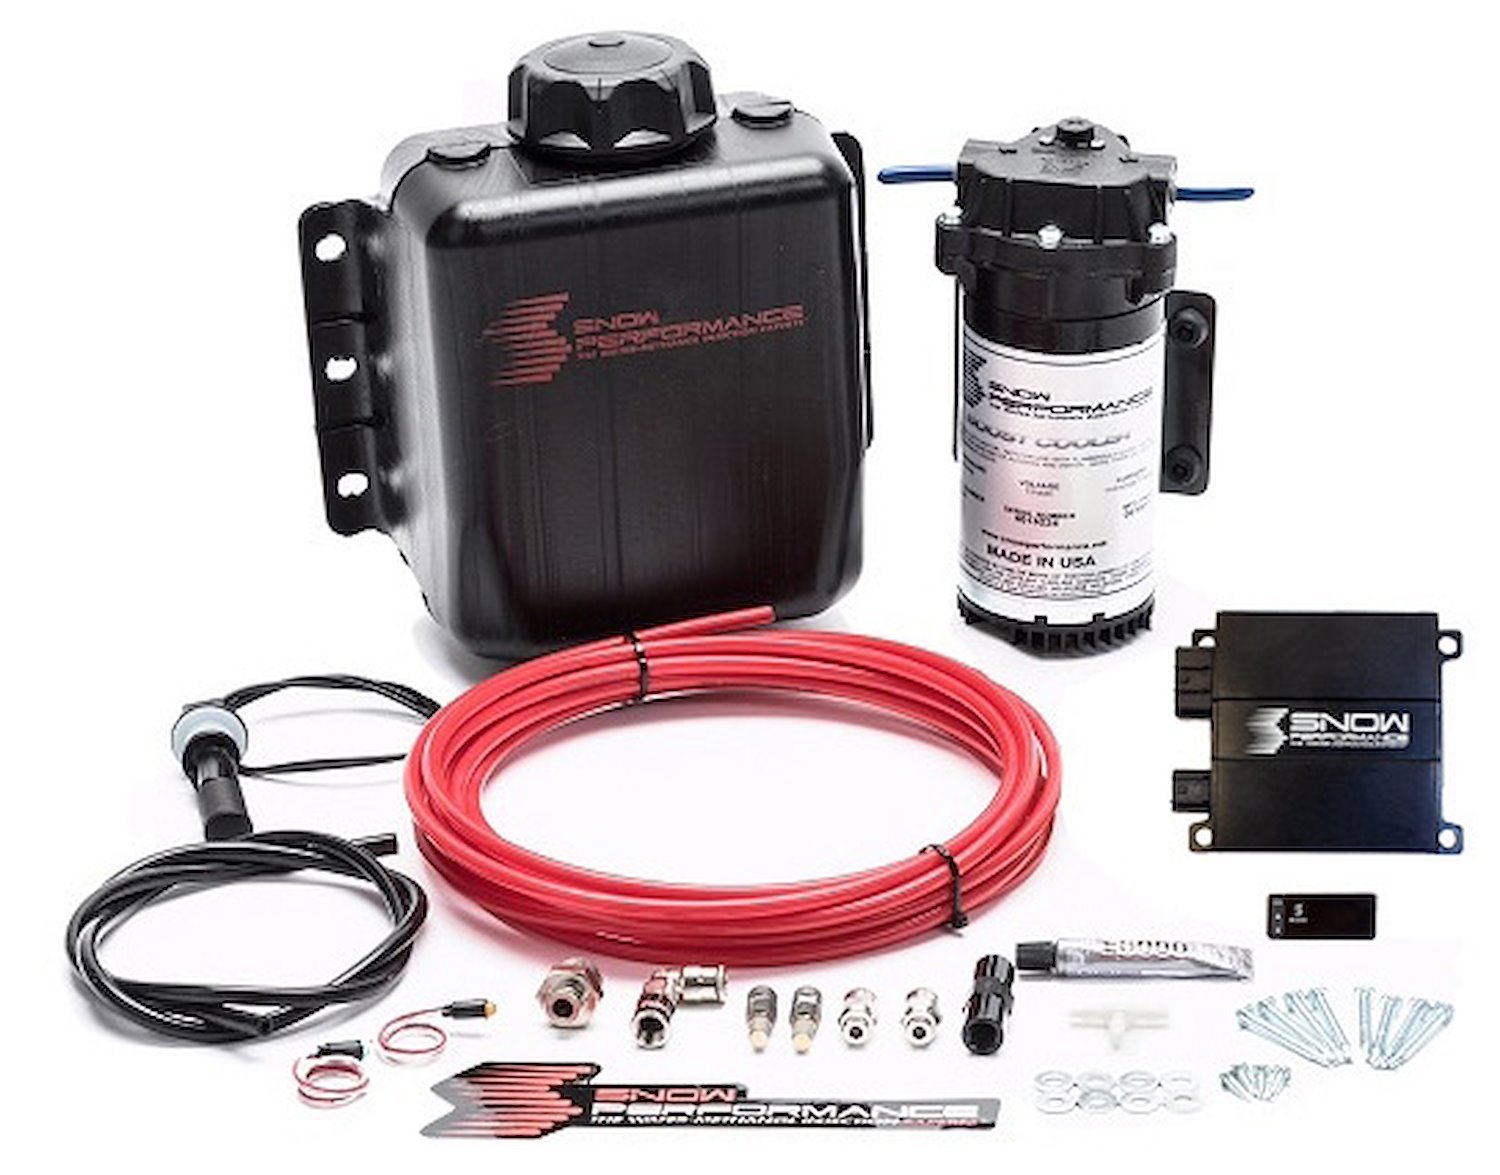 Stage-2 Gasoline Boost Cooler Water-Methanol Injection Kit for